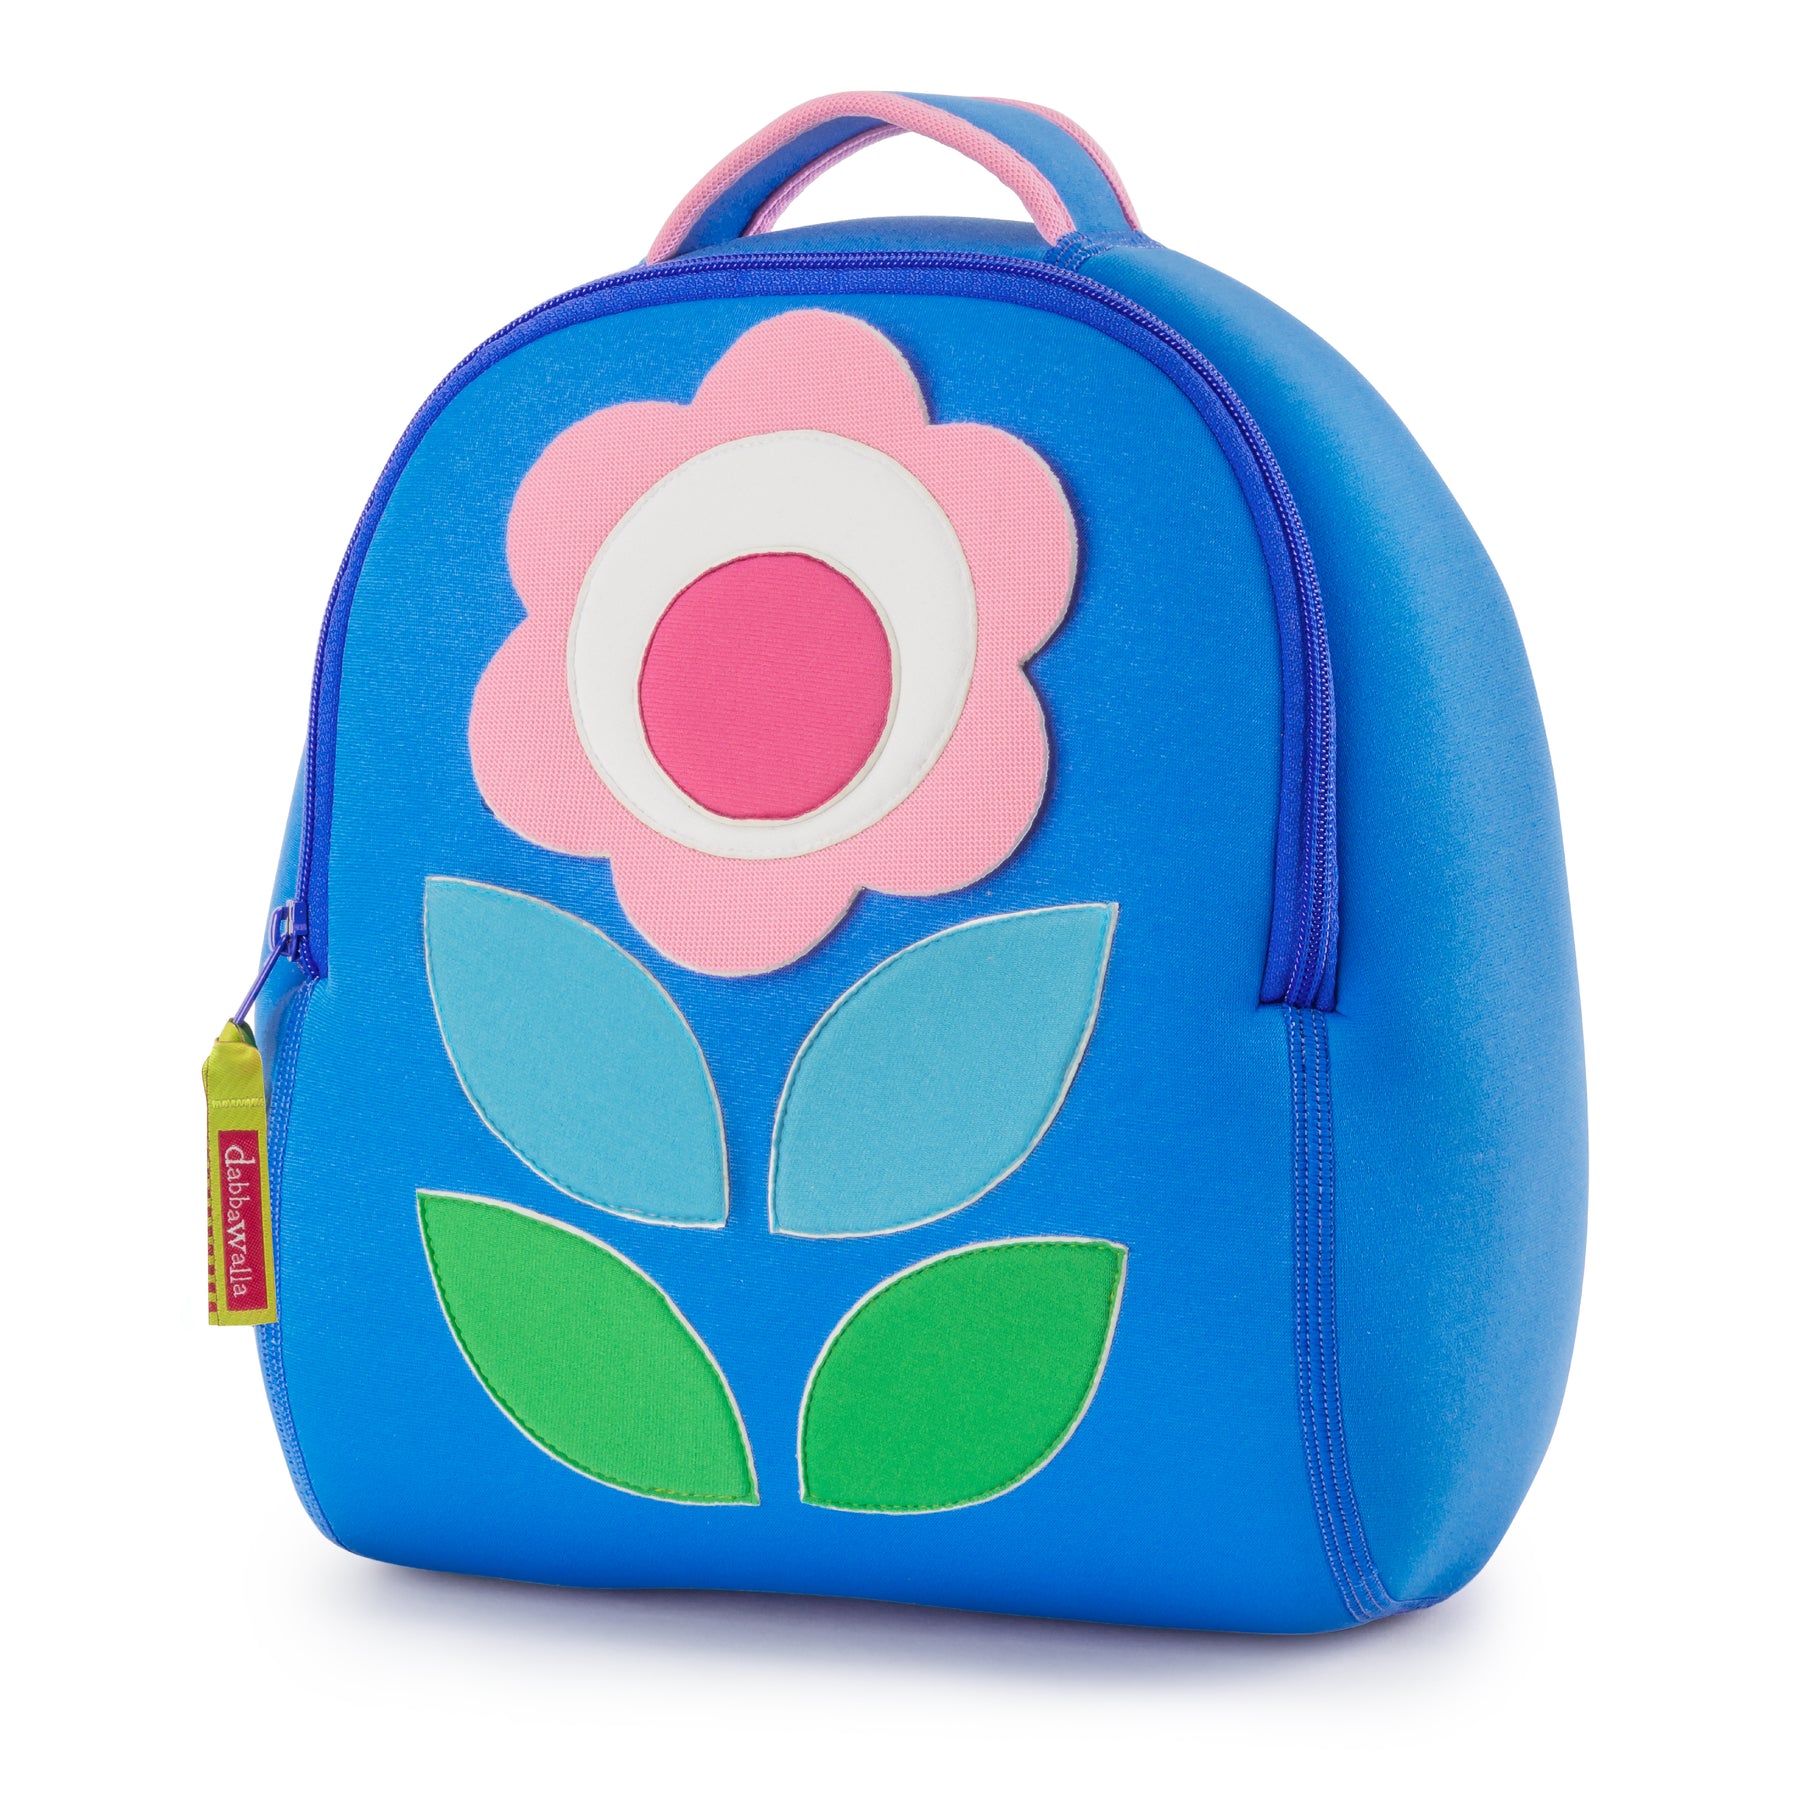 Call It Spring Purse Backpacks